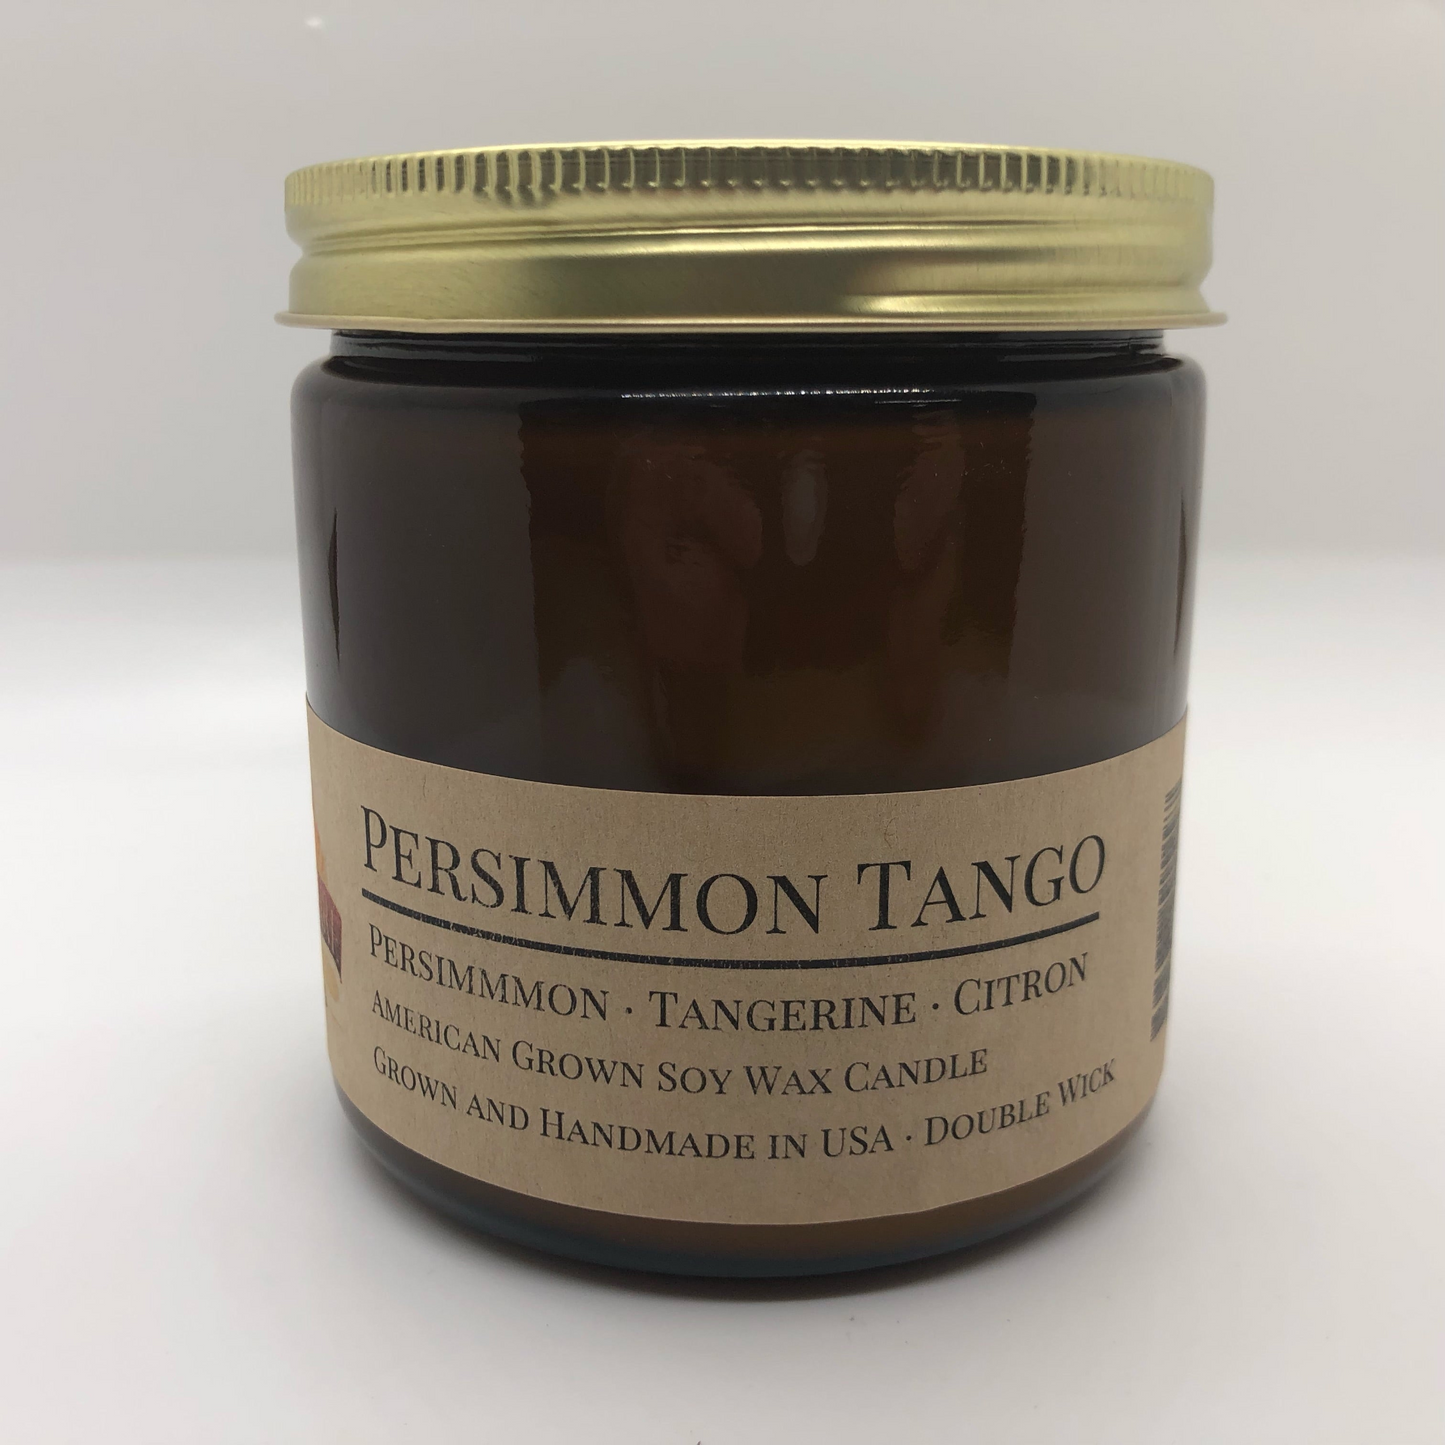 Persimmon Tango Soy Wax Candle | 16 oz Double Wick Amber Apothecary Jar